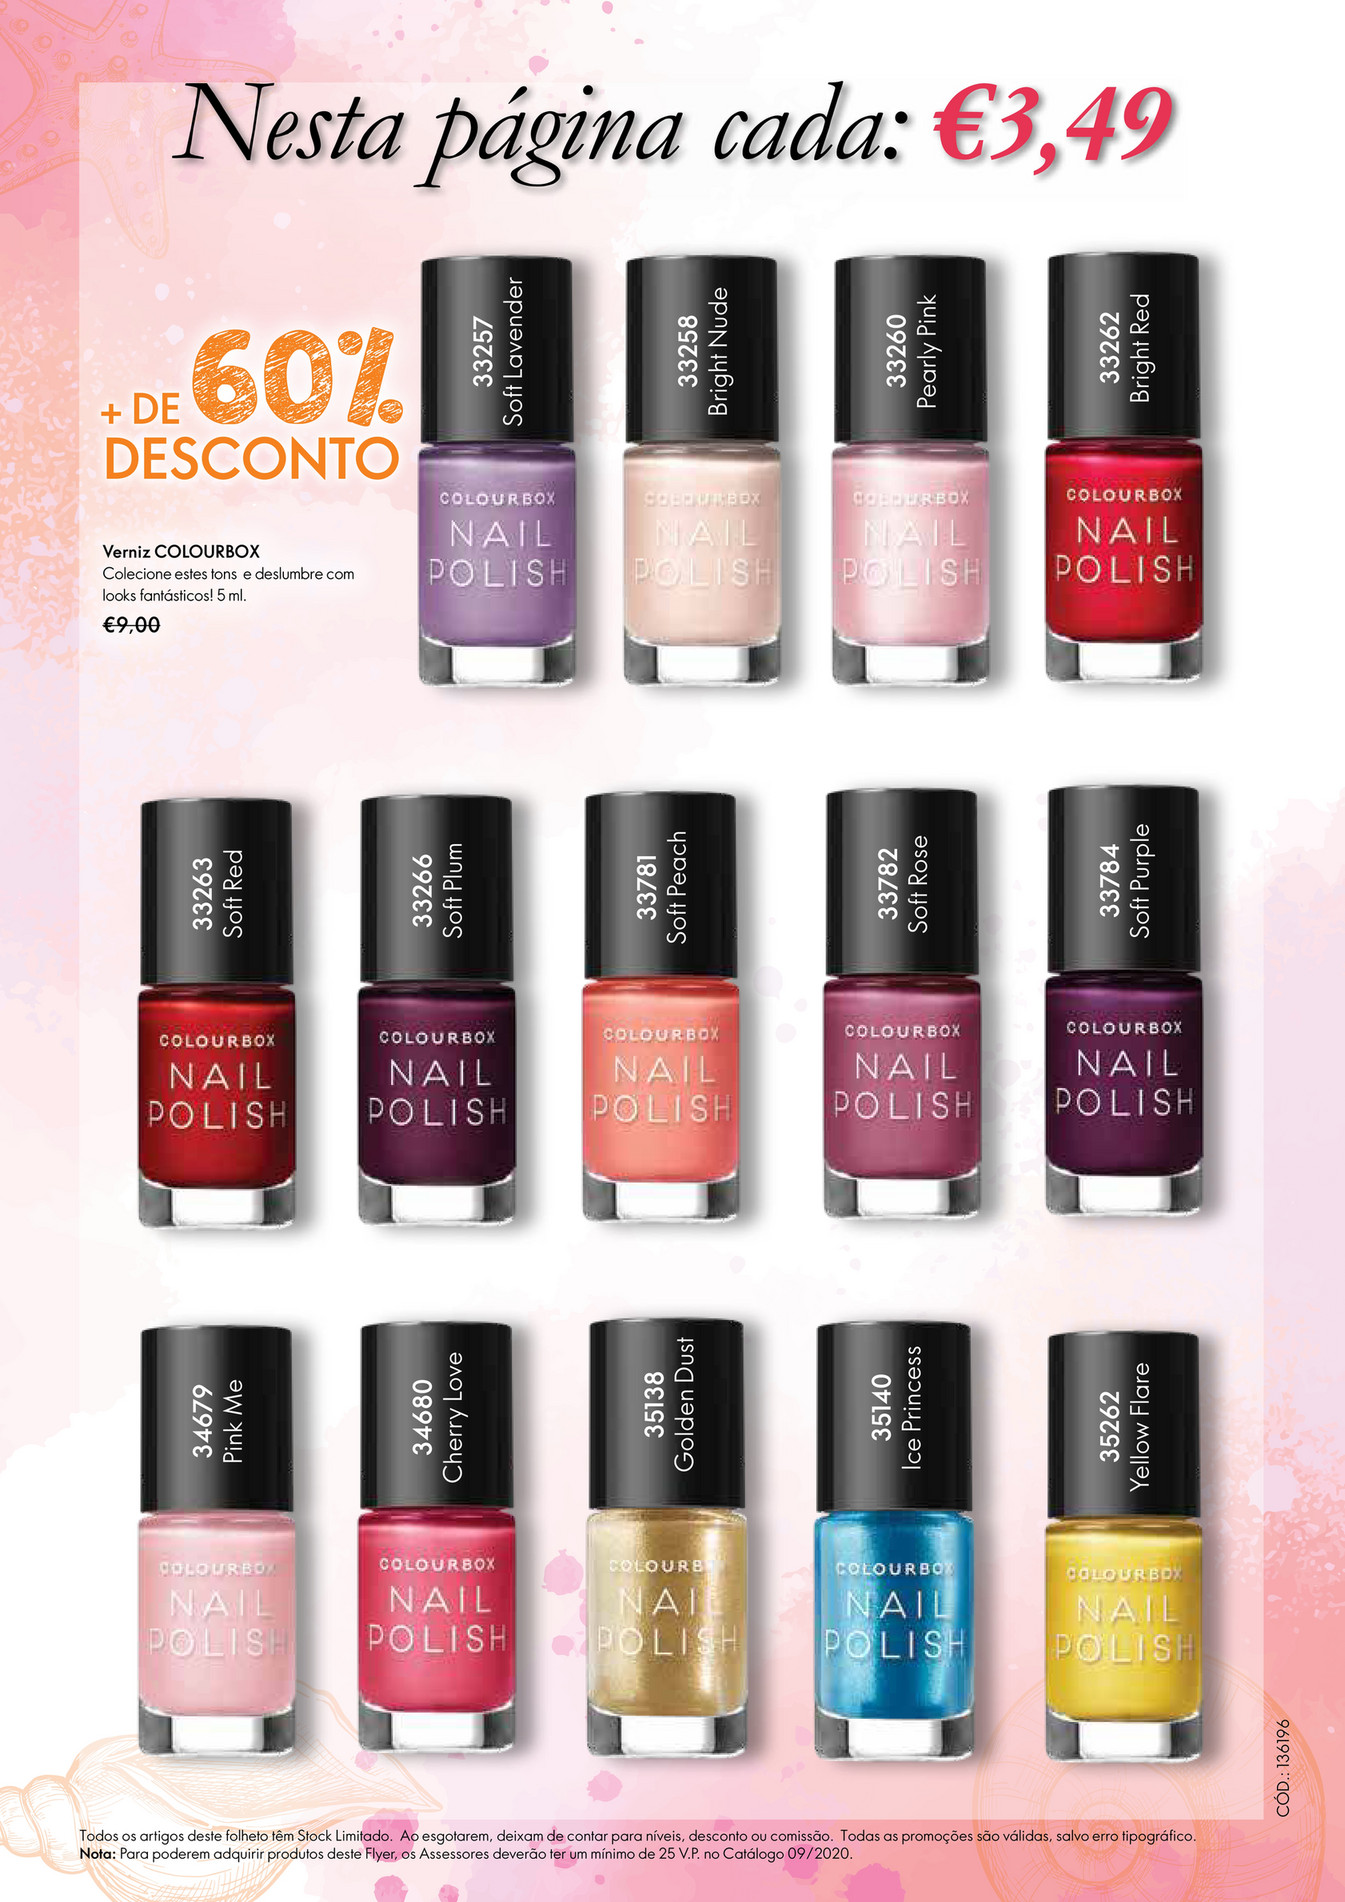 Oriflame - Our Colourbox nail polishes are available in your favourite  colours (5) to match your everyday outfits :) They are light in weight,  have a medium-sized brush to ensure there is